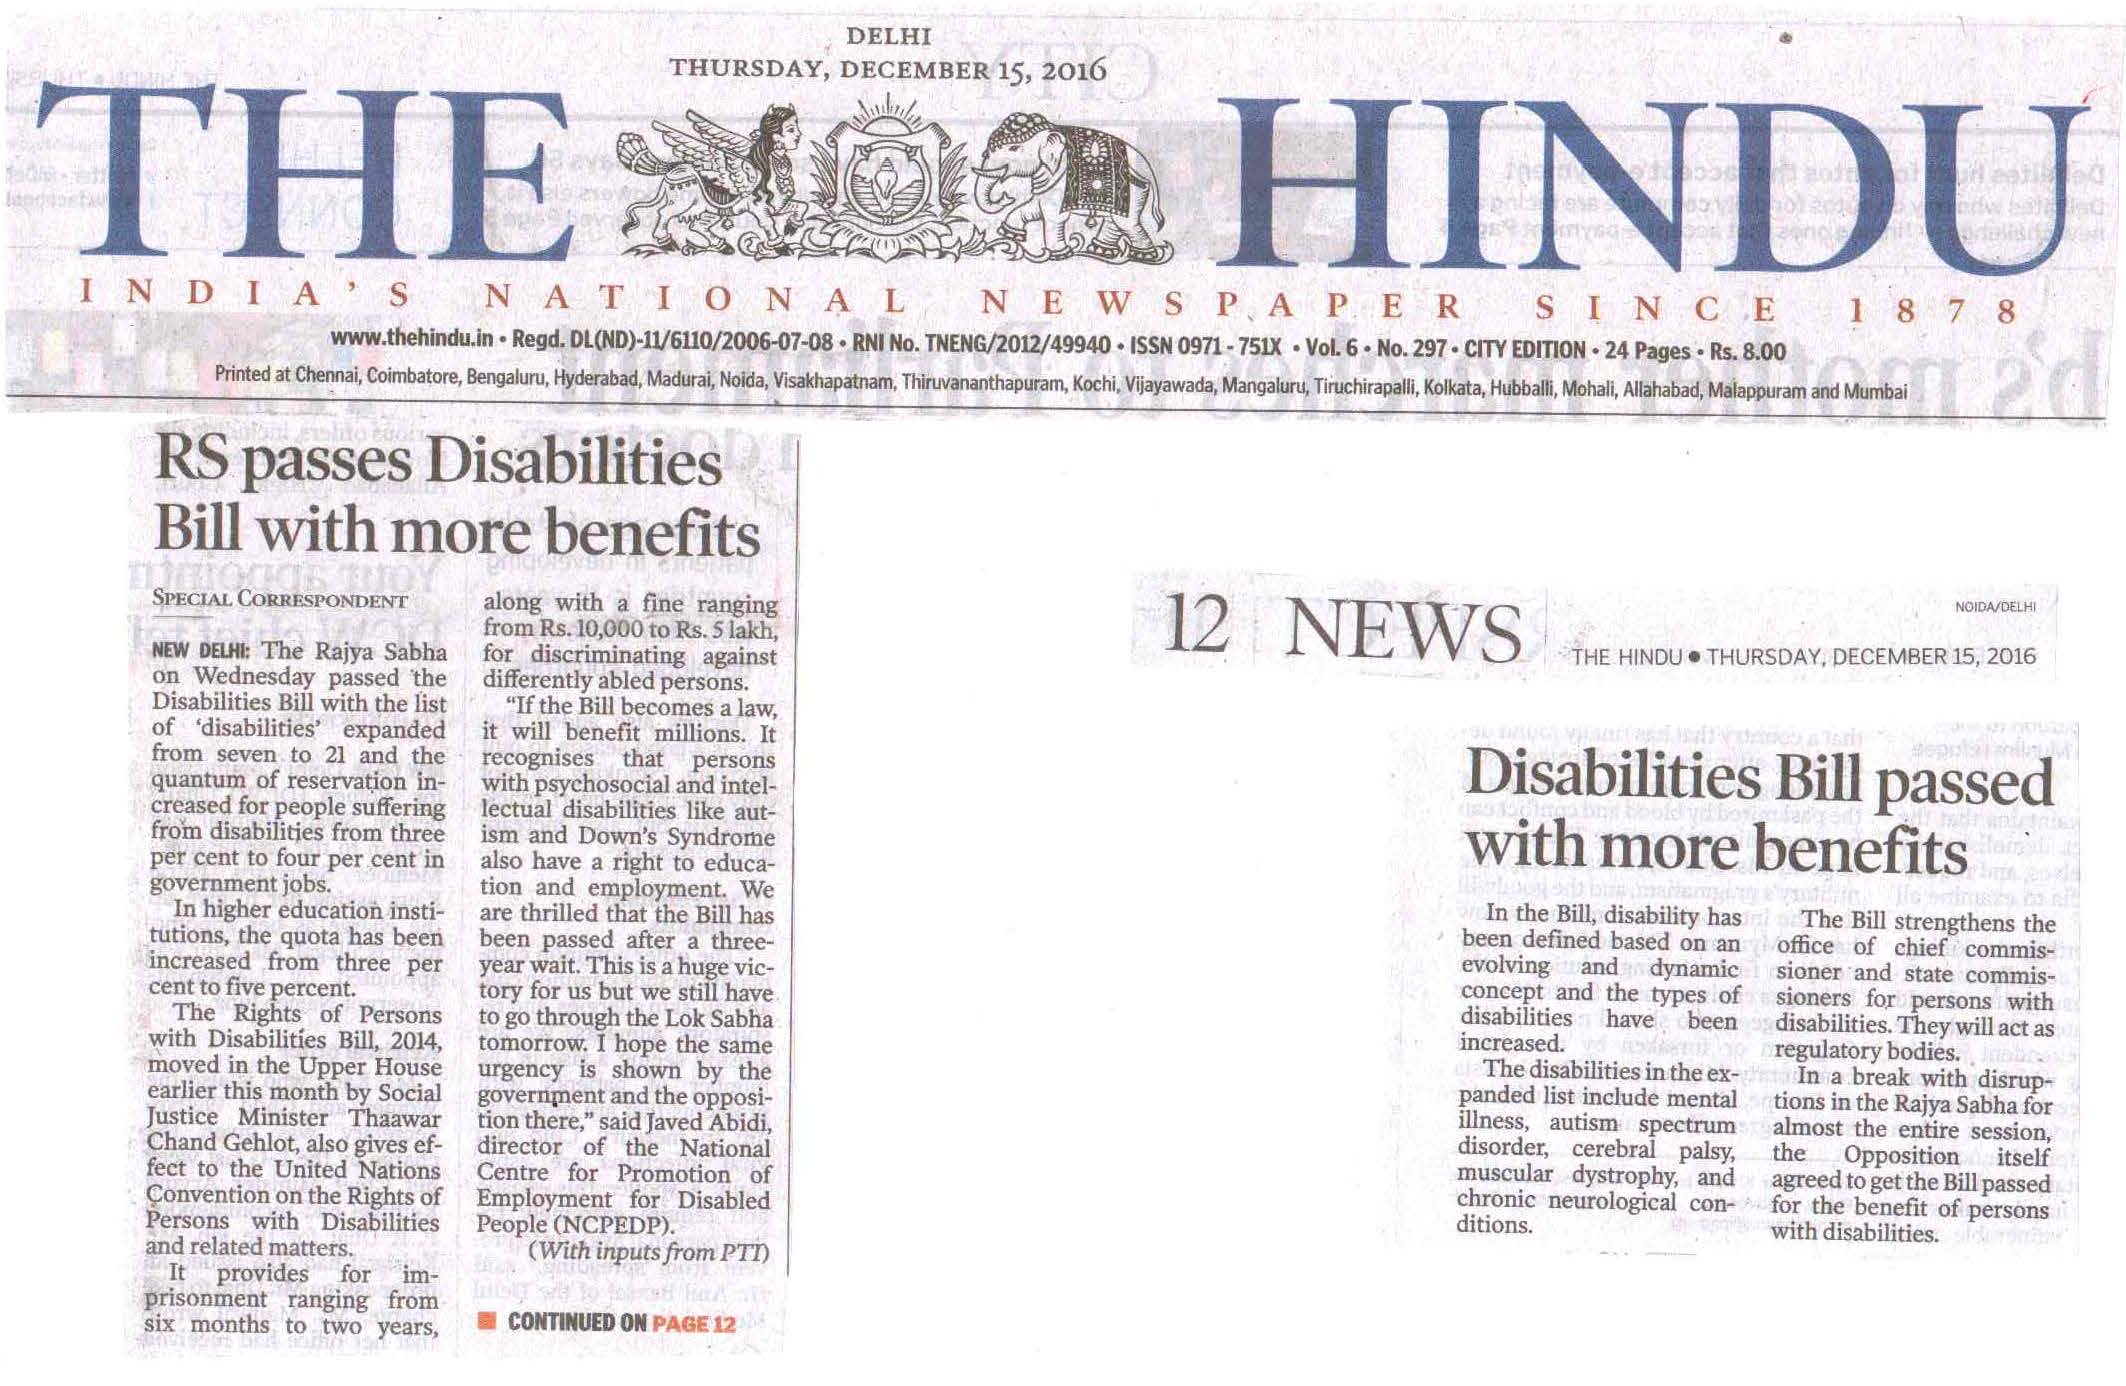 RS passes Disabilities Bill with more benefits